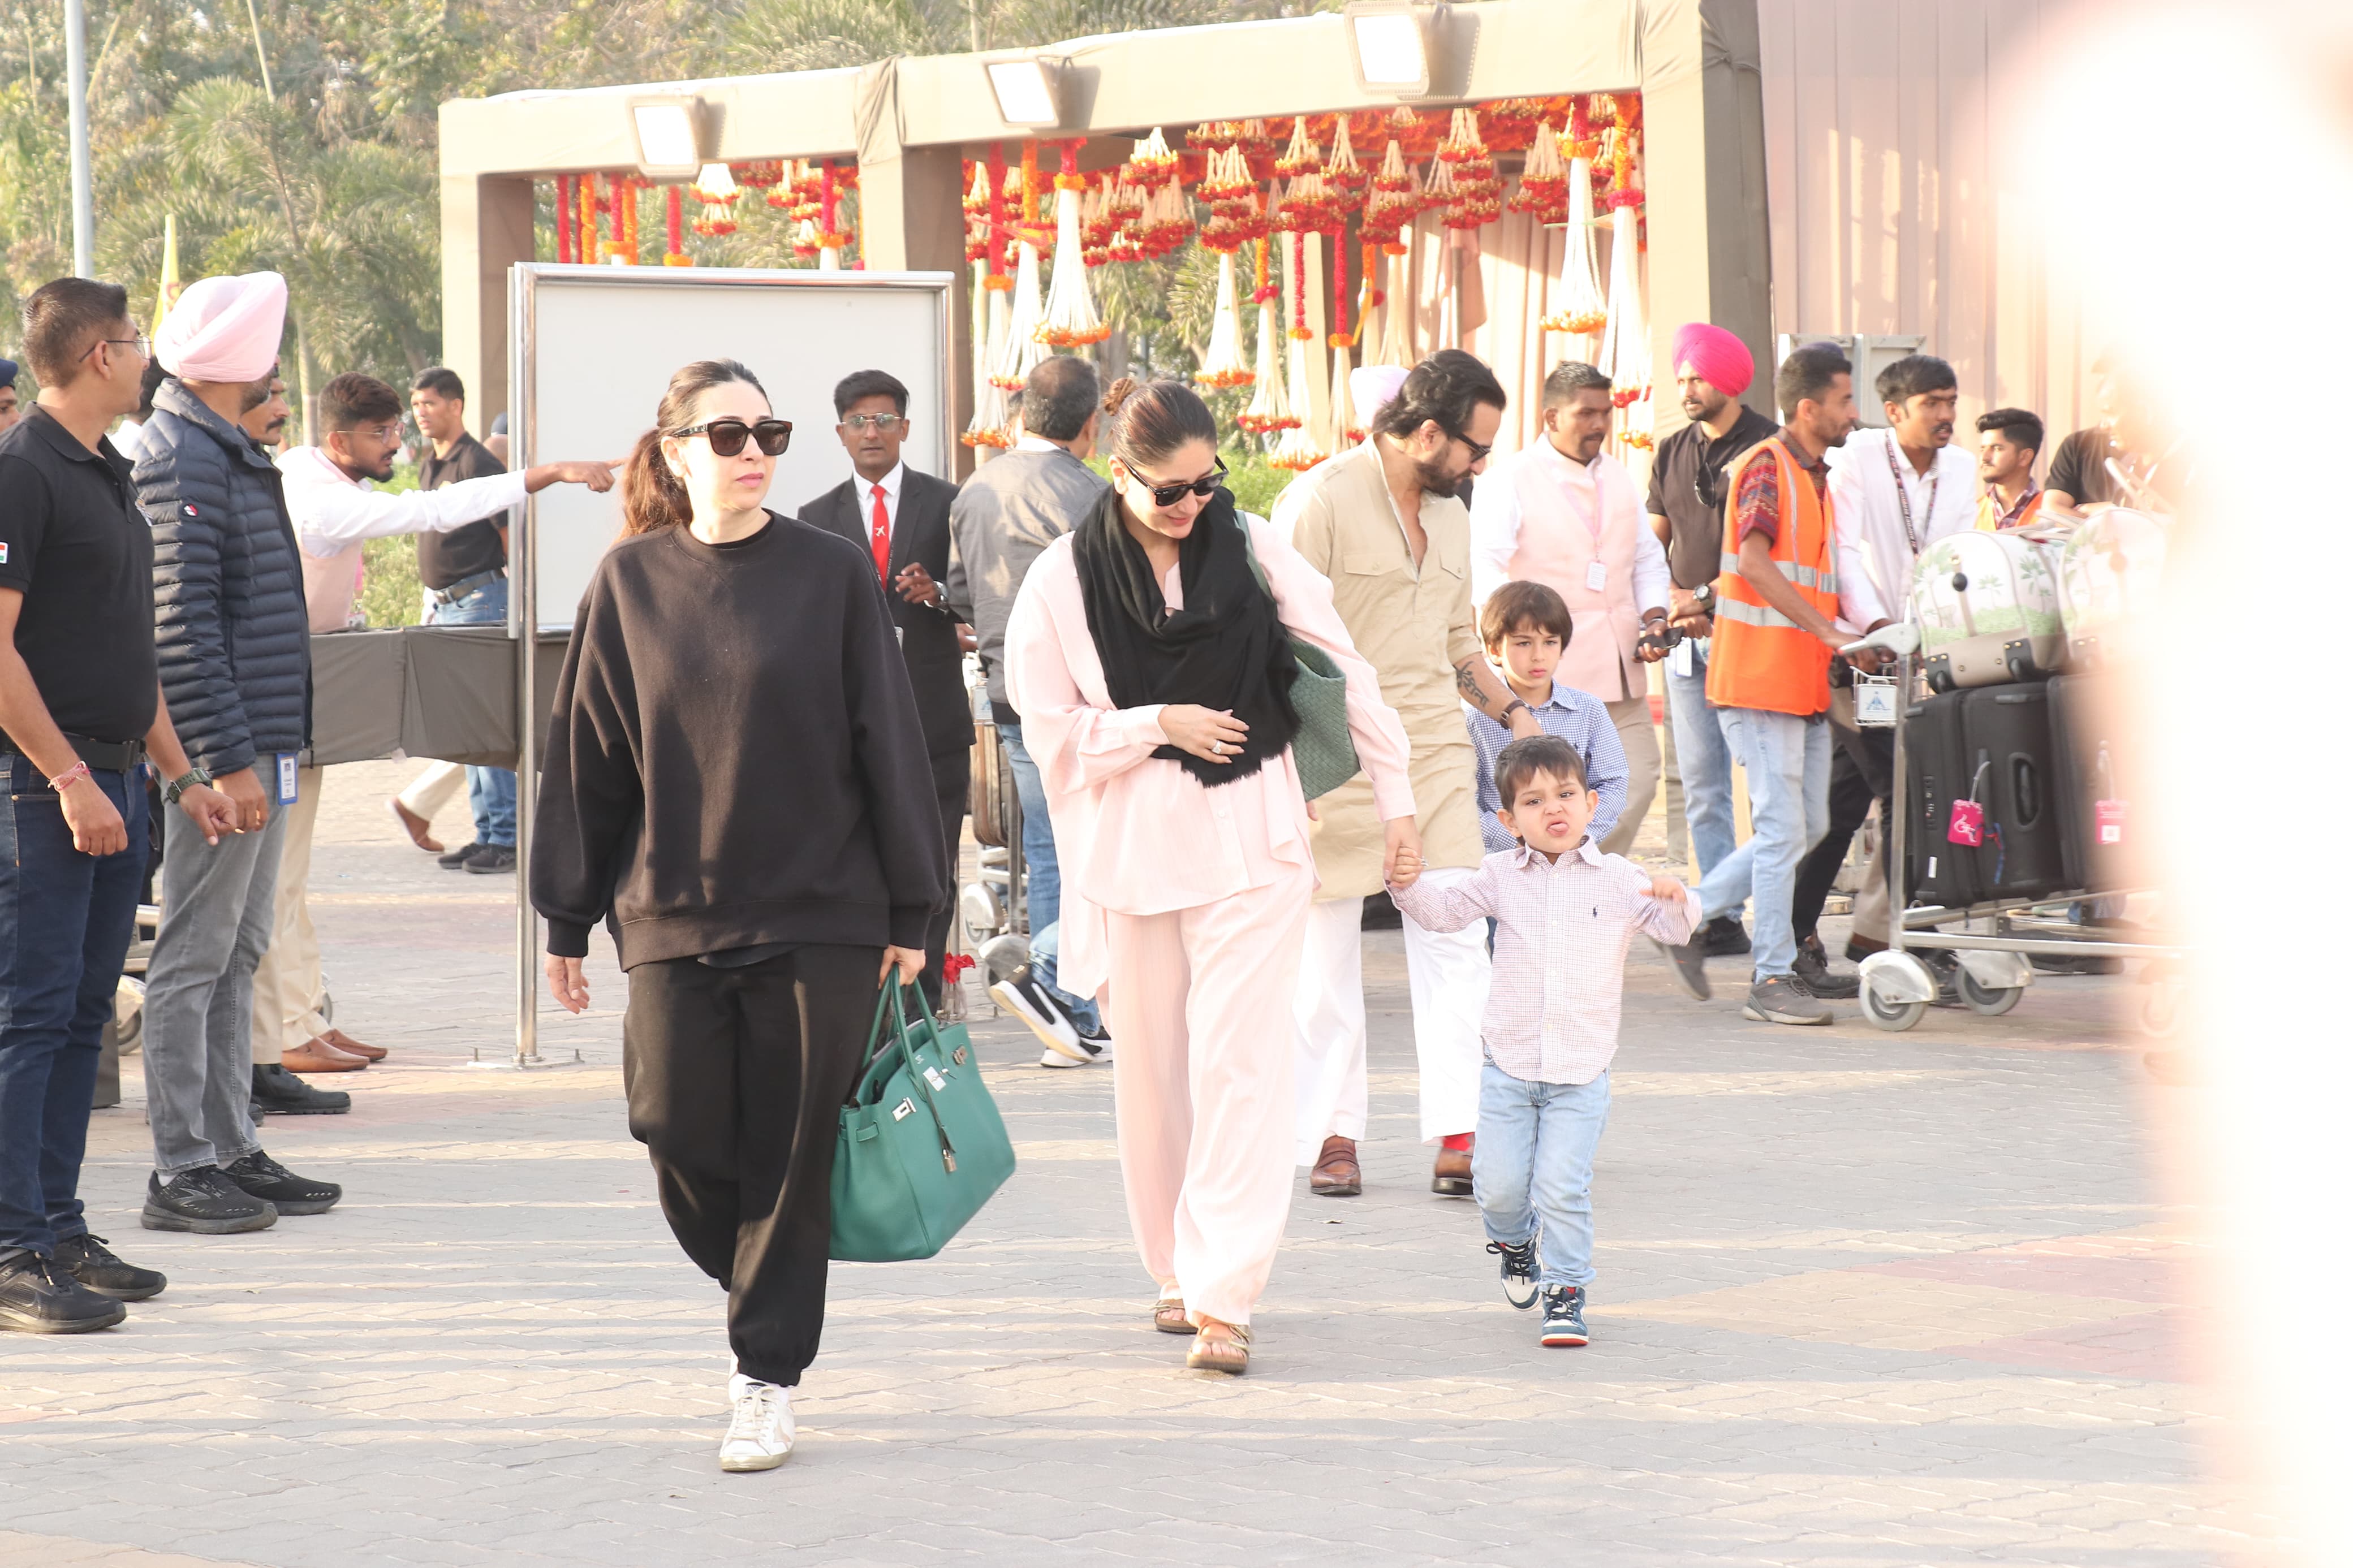 Karisma Kapoor, Kareena Kapoor, Saif Ali Khan, along with Taimur and Jeh, were snapped together as they jetted off from the city